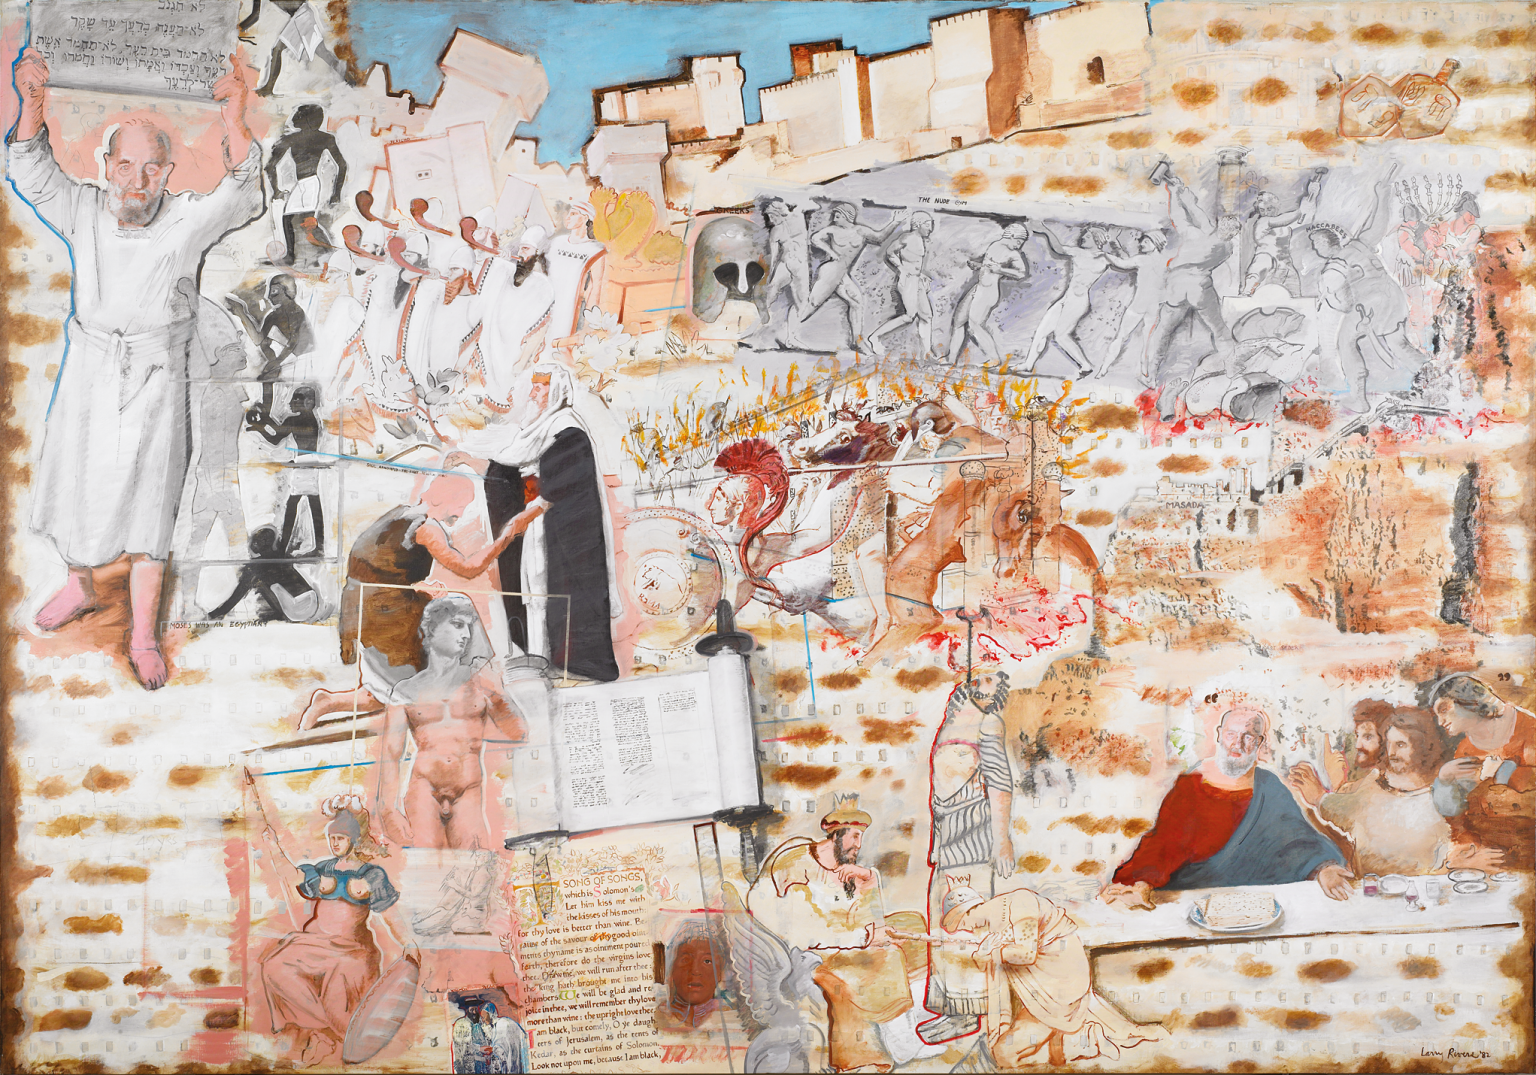 Painting of a piece of matzah featuring ancient Greek soldiers, shields, biblical figures, Greek statues, and scrolls, and buildings in the background.